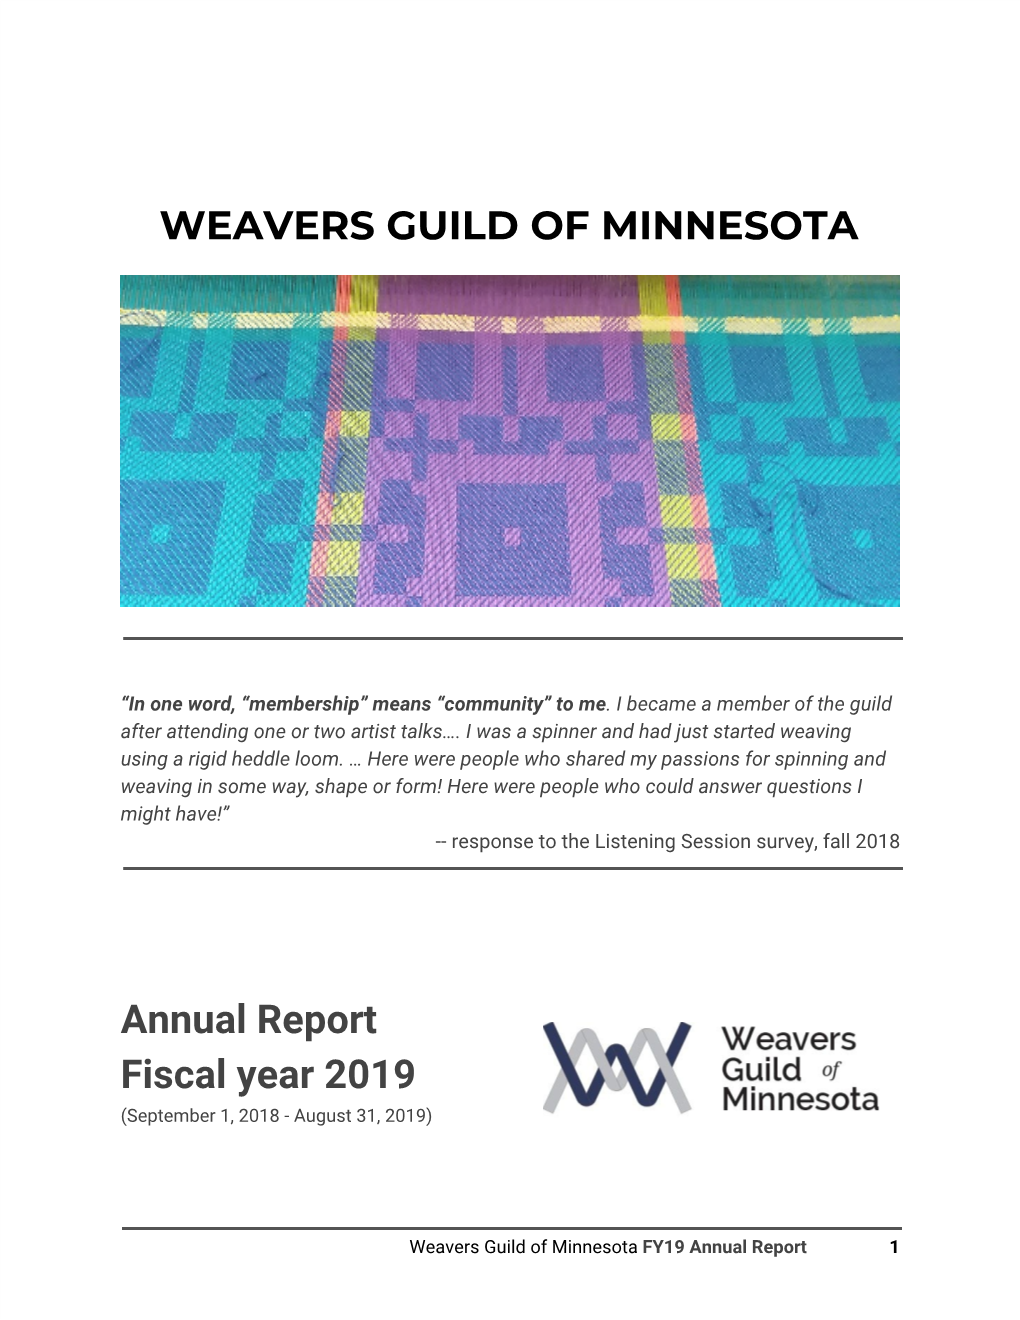 Annual Report FY19